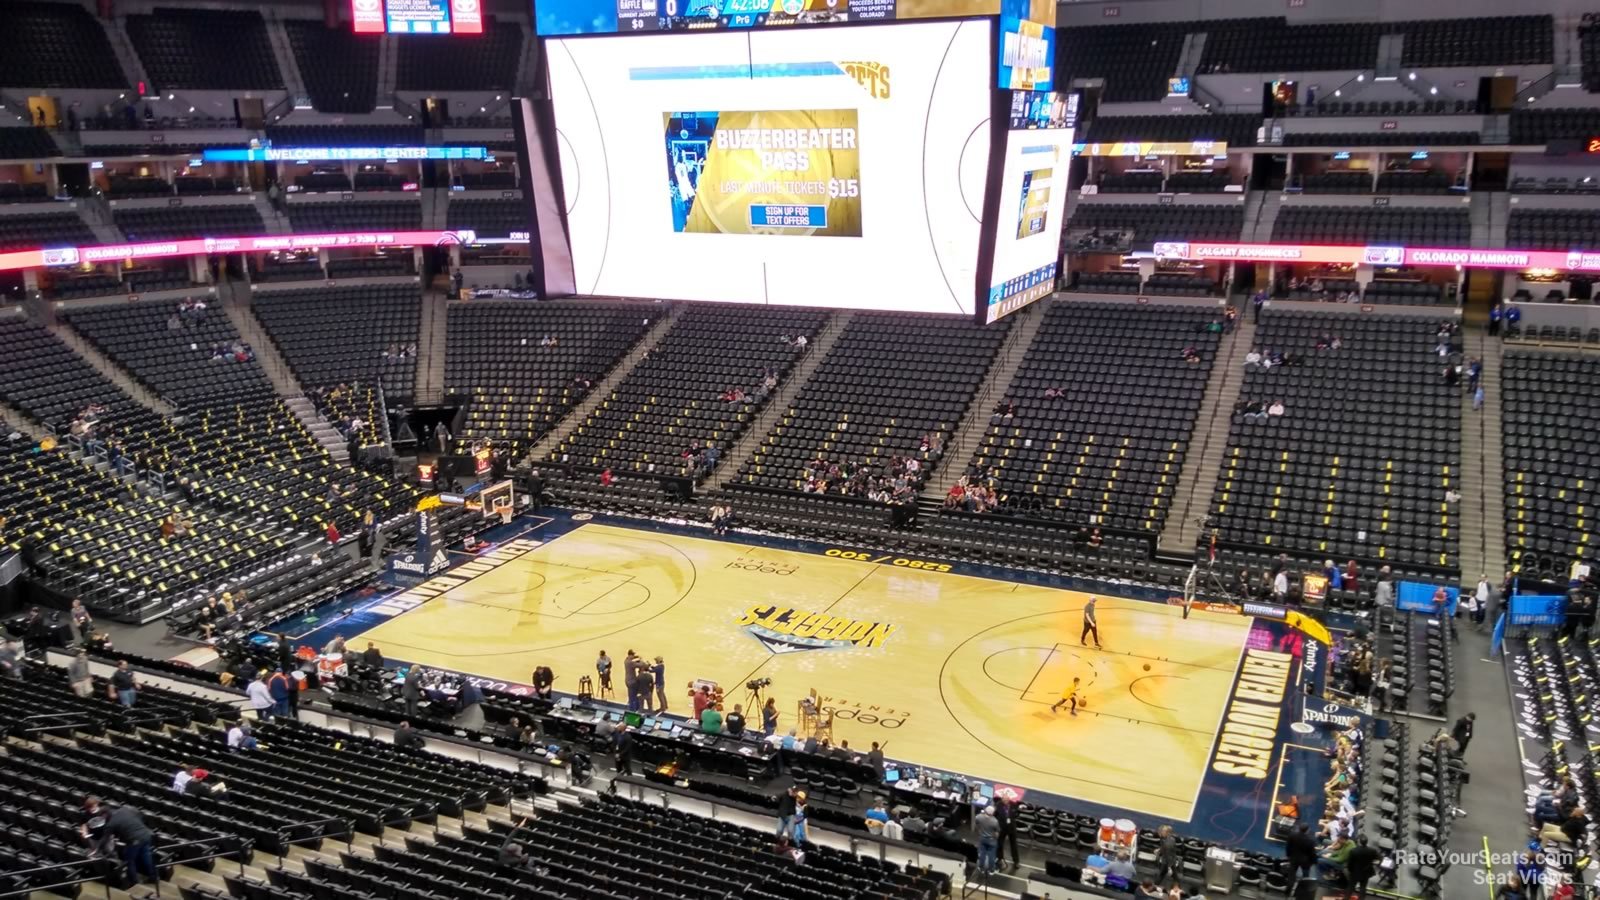 section 379, row 1 seat view  for basketball - ball arena